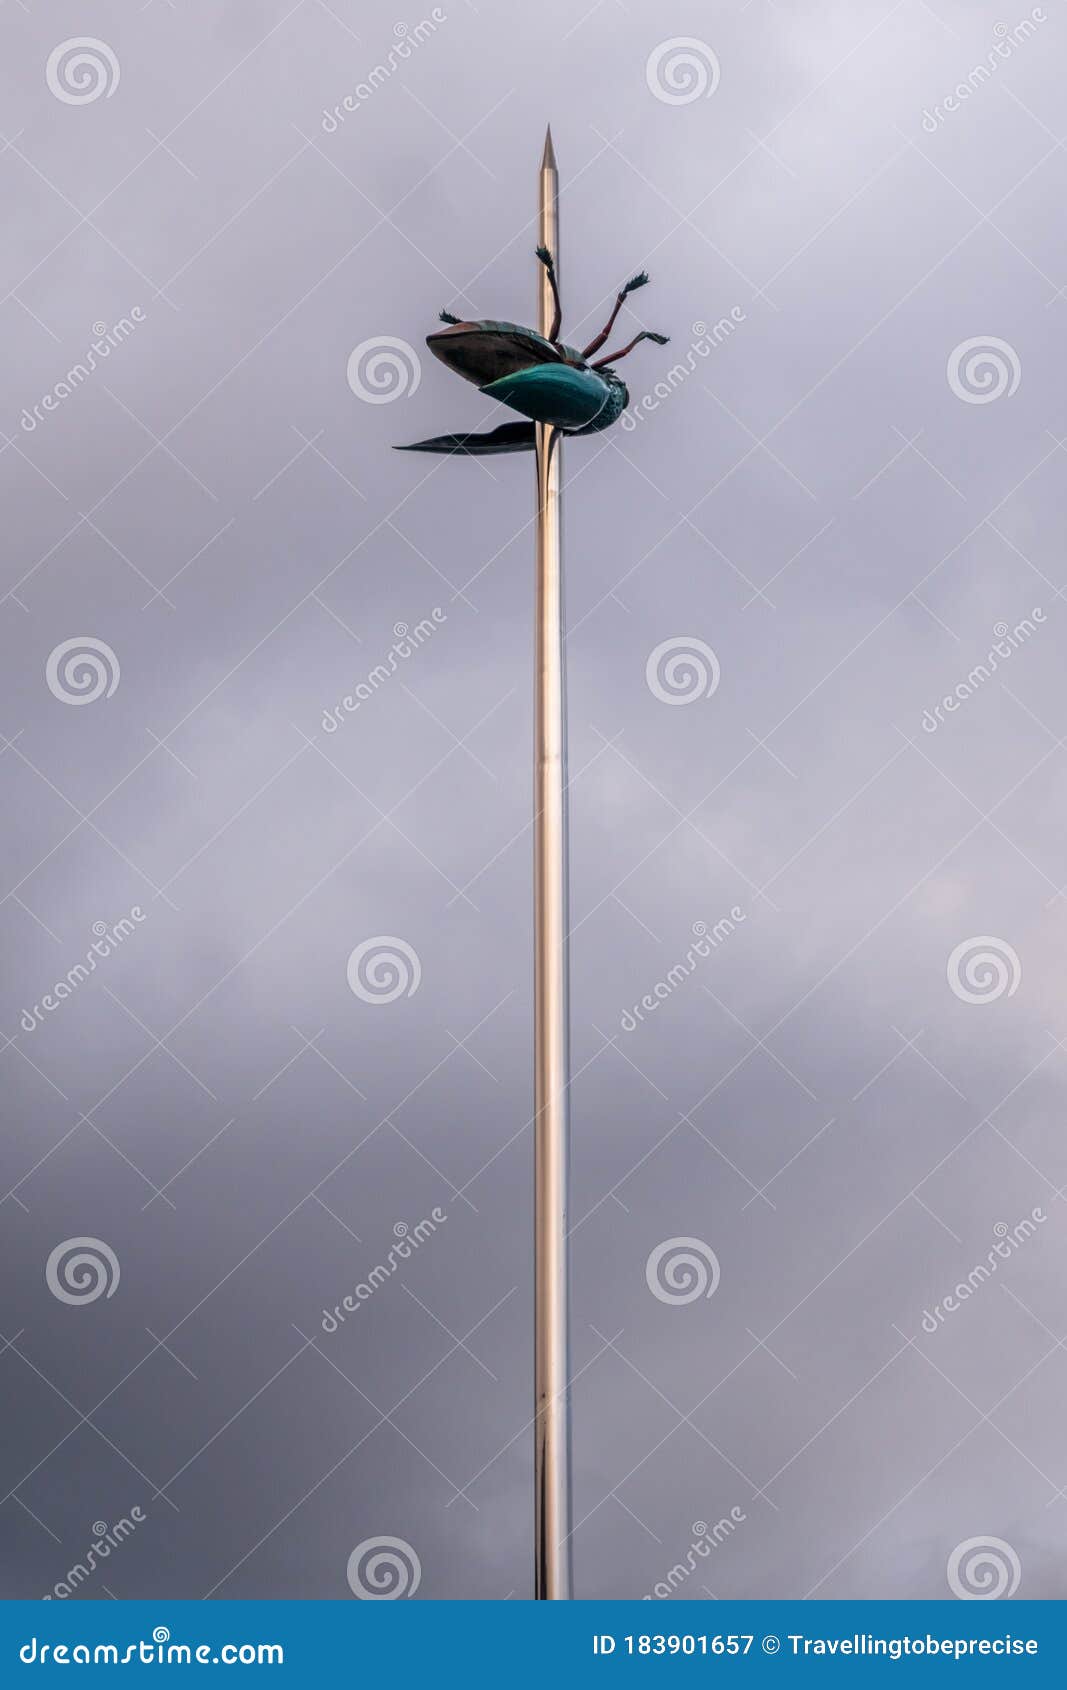 Impaled Beetle: the 2004 Sculpture Totem by Renowned Artist Jan Fabre, at  the Square Ladeuzeplein, Leuven, Belgium Stock Image - Image of library,  landmarks: 183901657